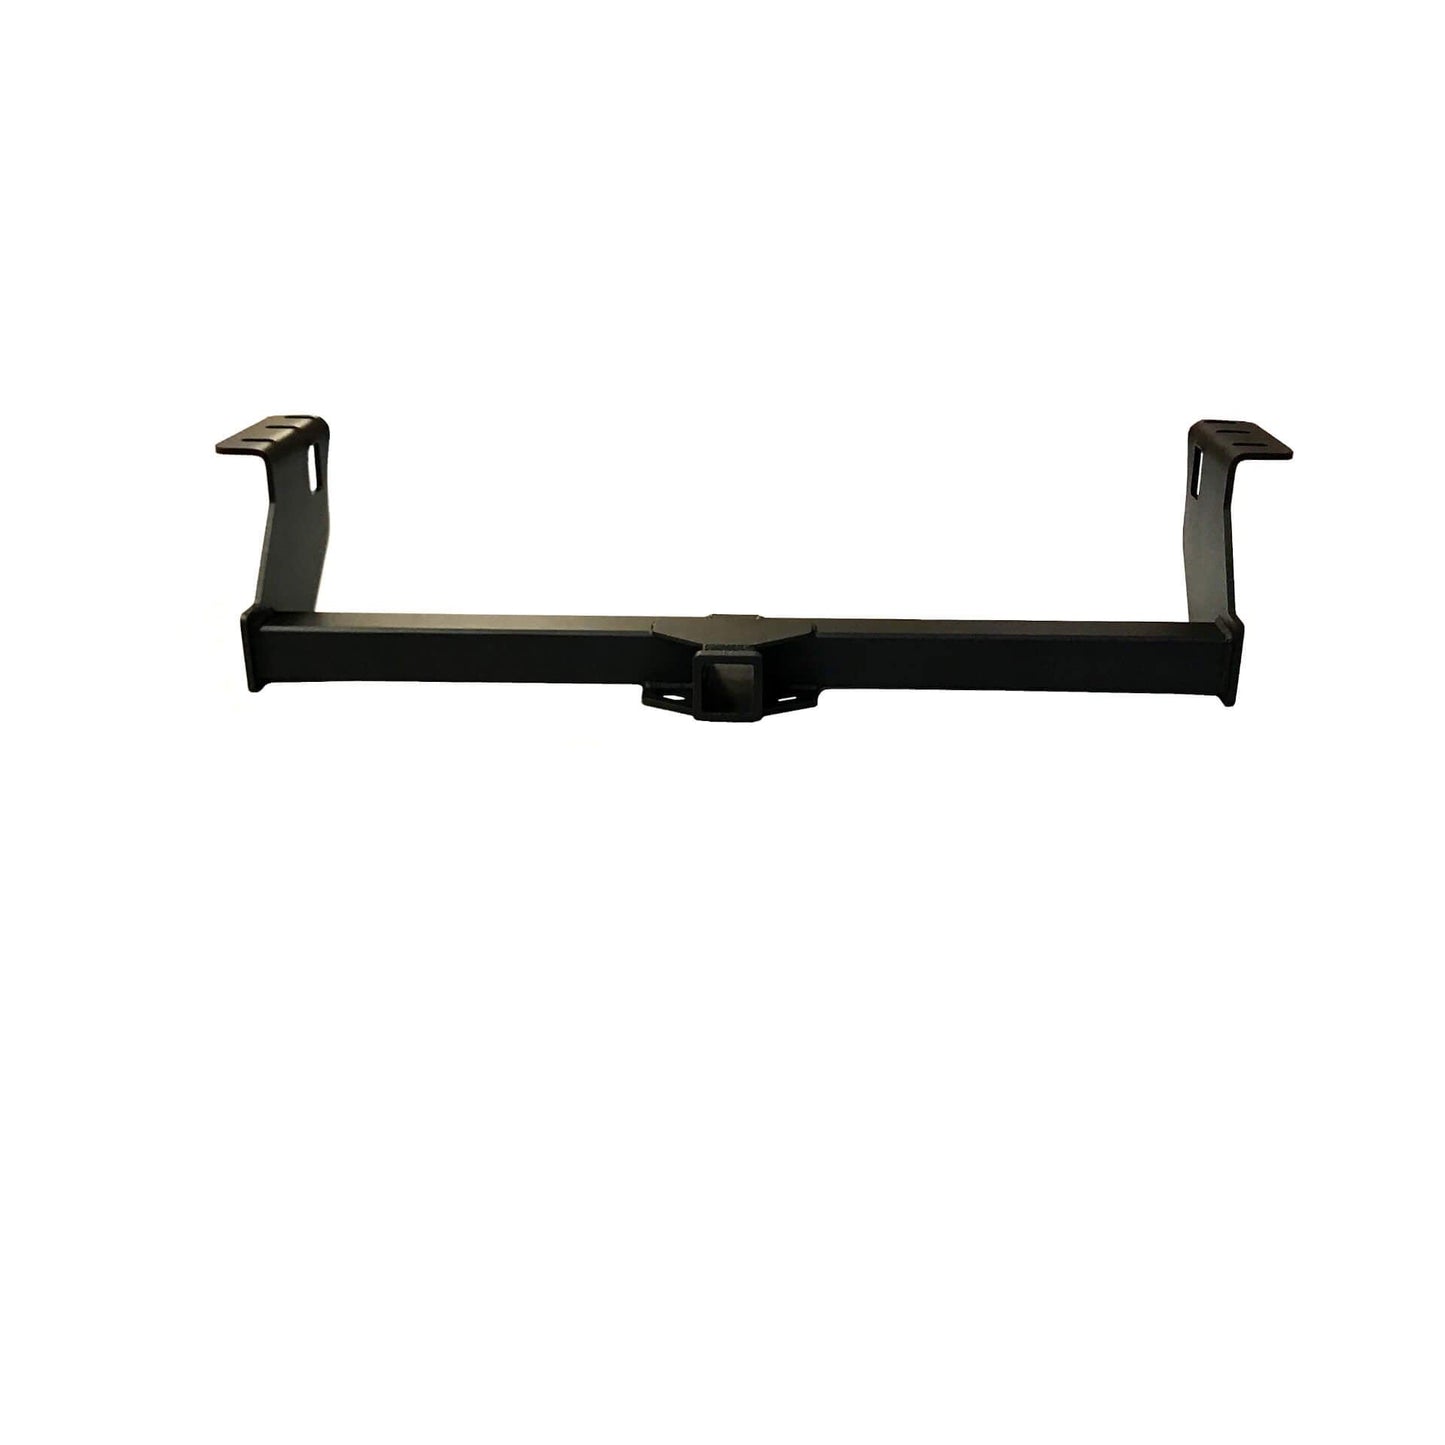 Heavy Duty Expedition Tow Hitch Bar for Ford Ranger 2012+ MK3 T6 (P375) DC